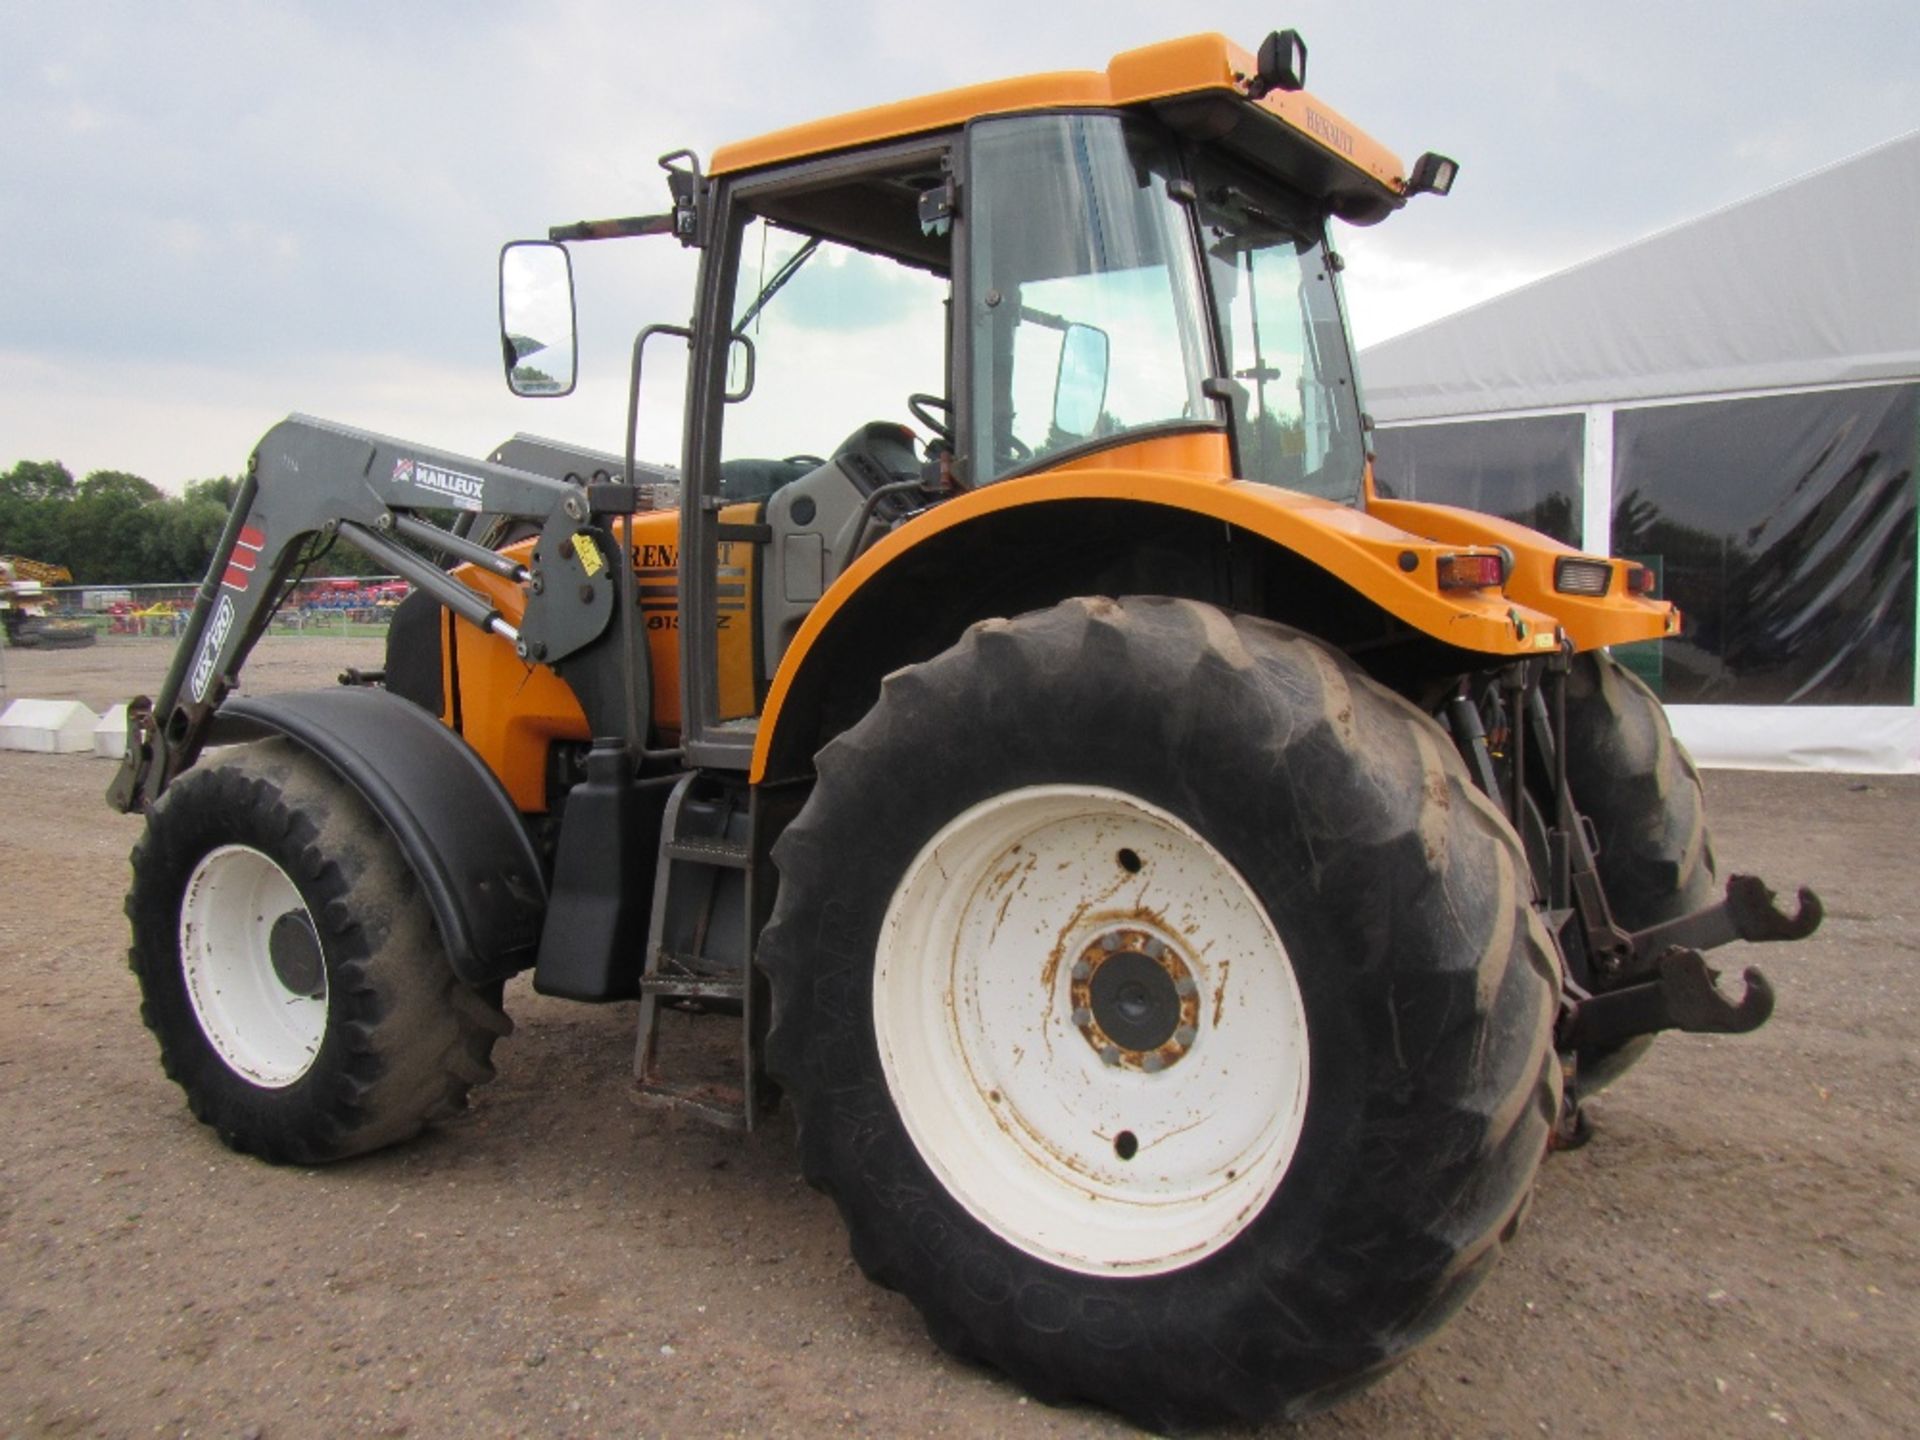 Renault Ares 815 RZ Tractor with Chilton MX120 Loader & Cab Suspension. Reg. No. SV51 ETL - Image 10 of 16